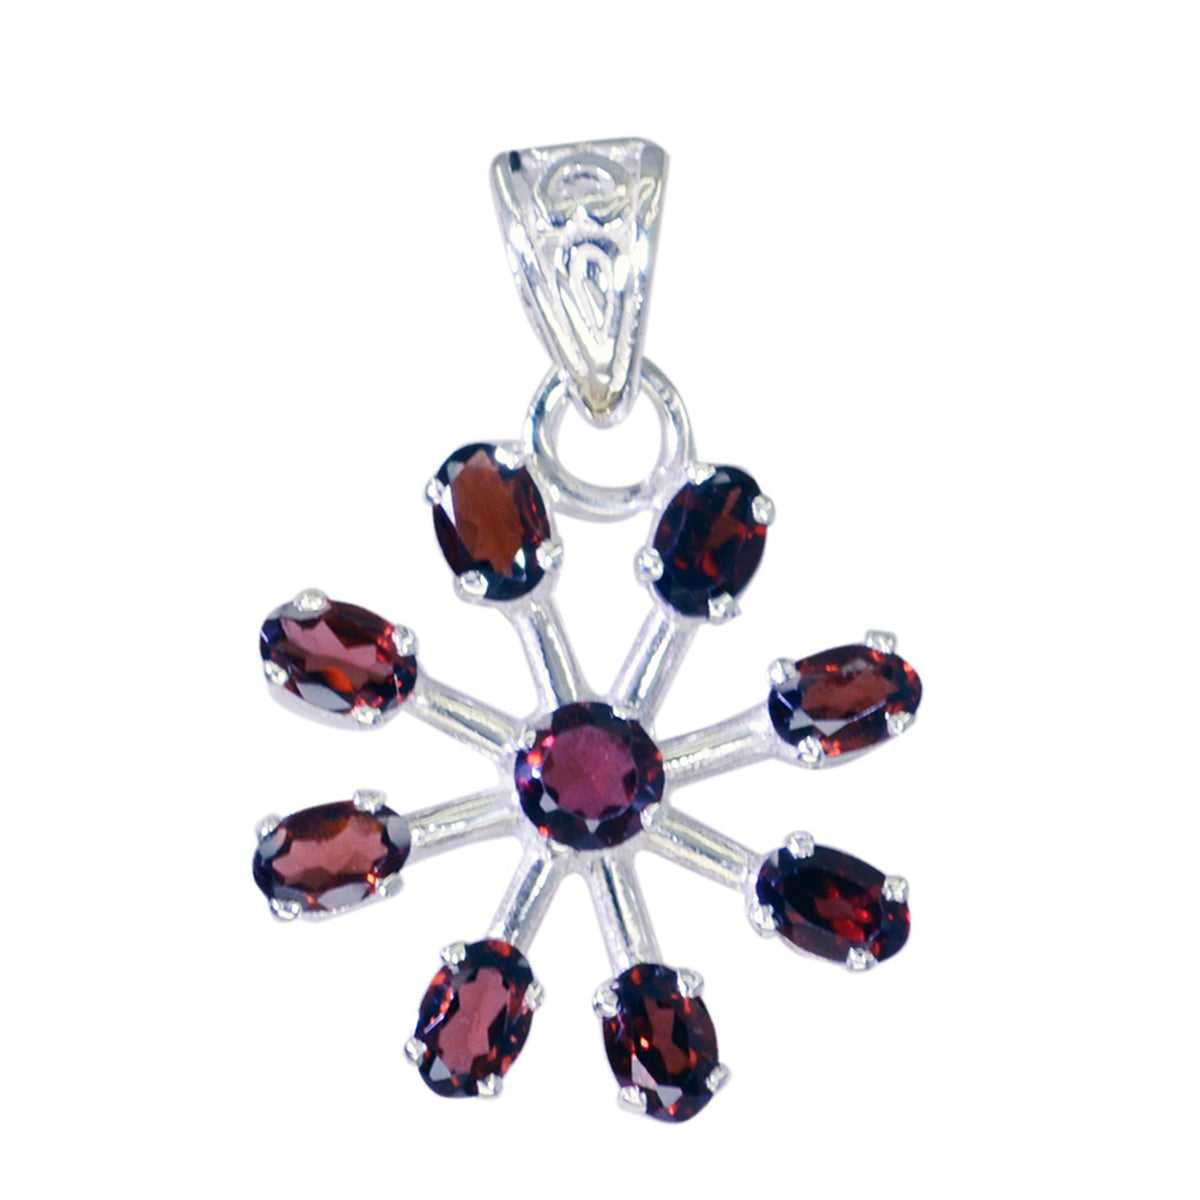 Riyo Comely Gems Multi Faceted Red Garnet Solid Silver Pendant Gift For Easter Sunday